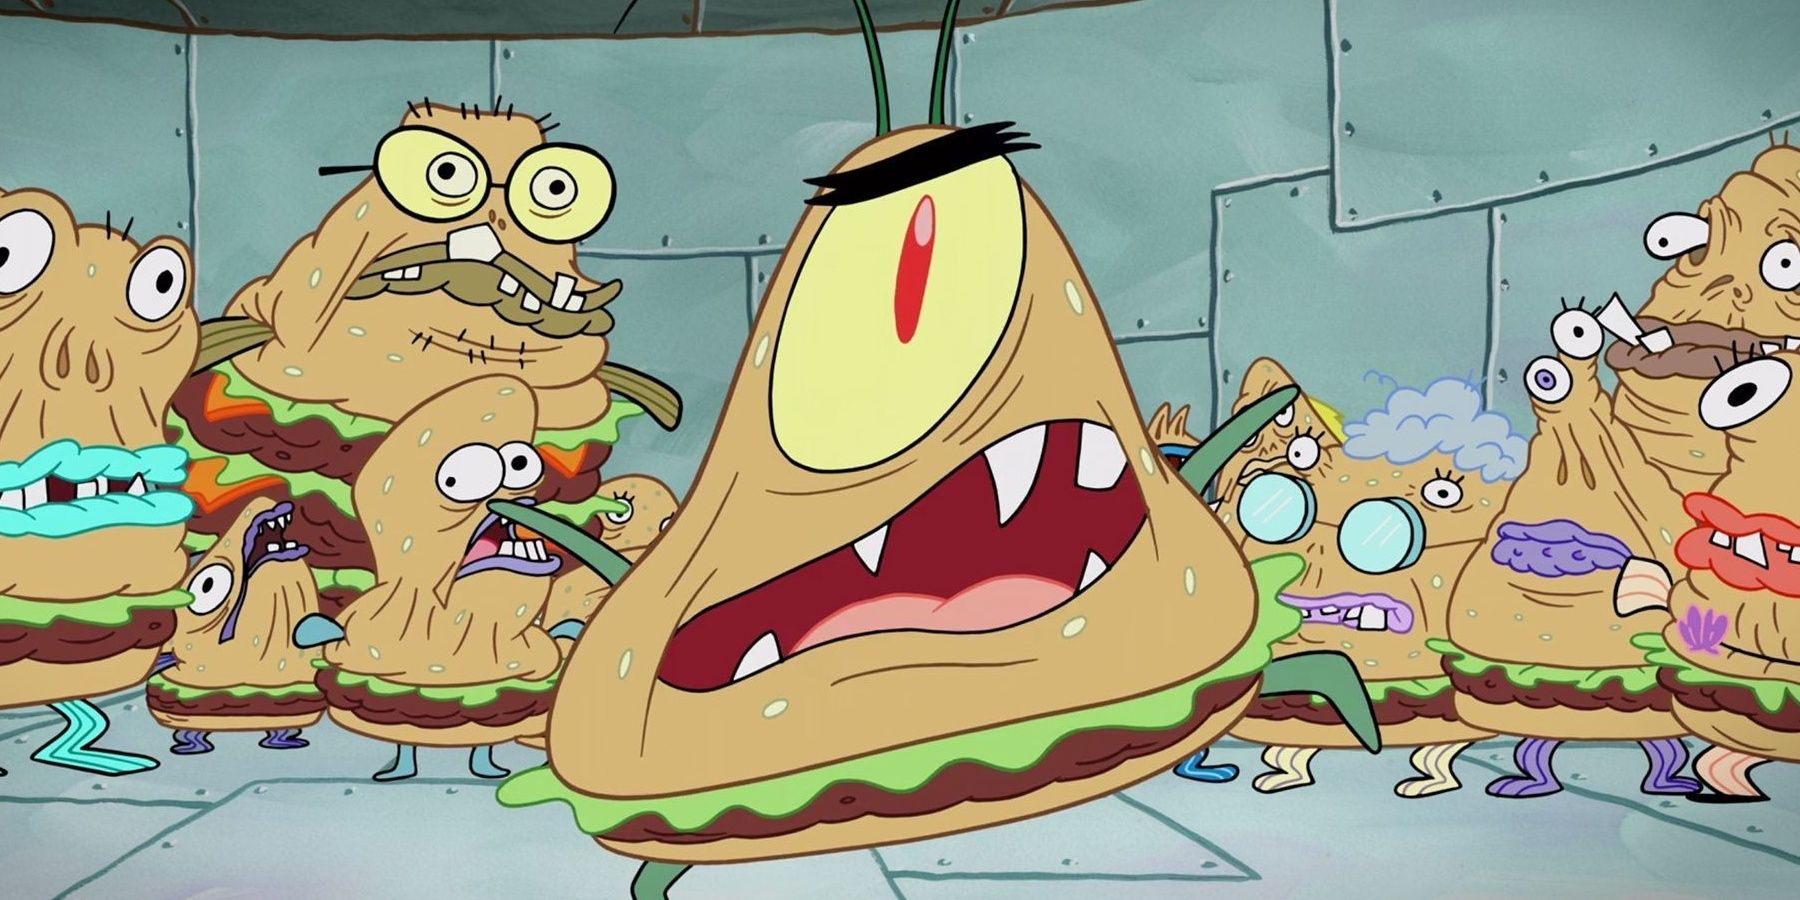 A still from the Spongebob Squarepants episode Krabby Patty Creature Feature.